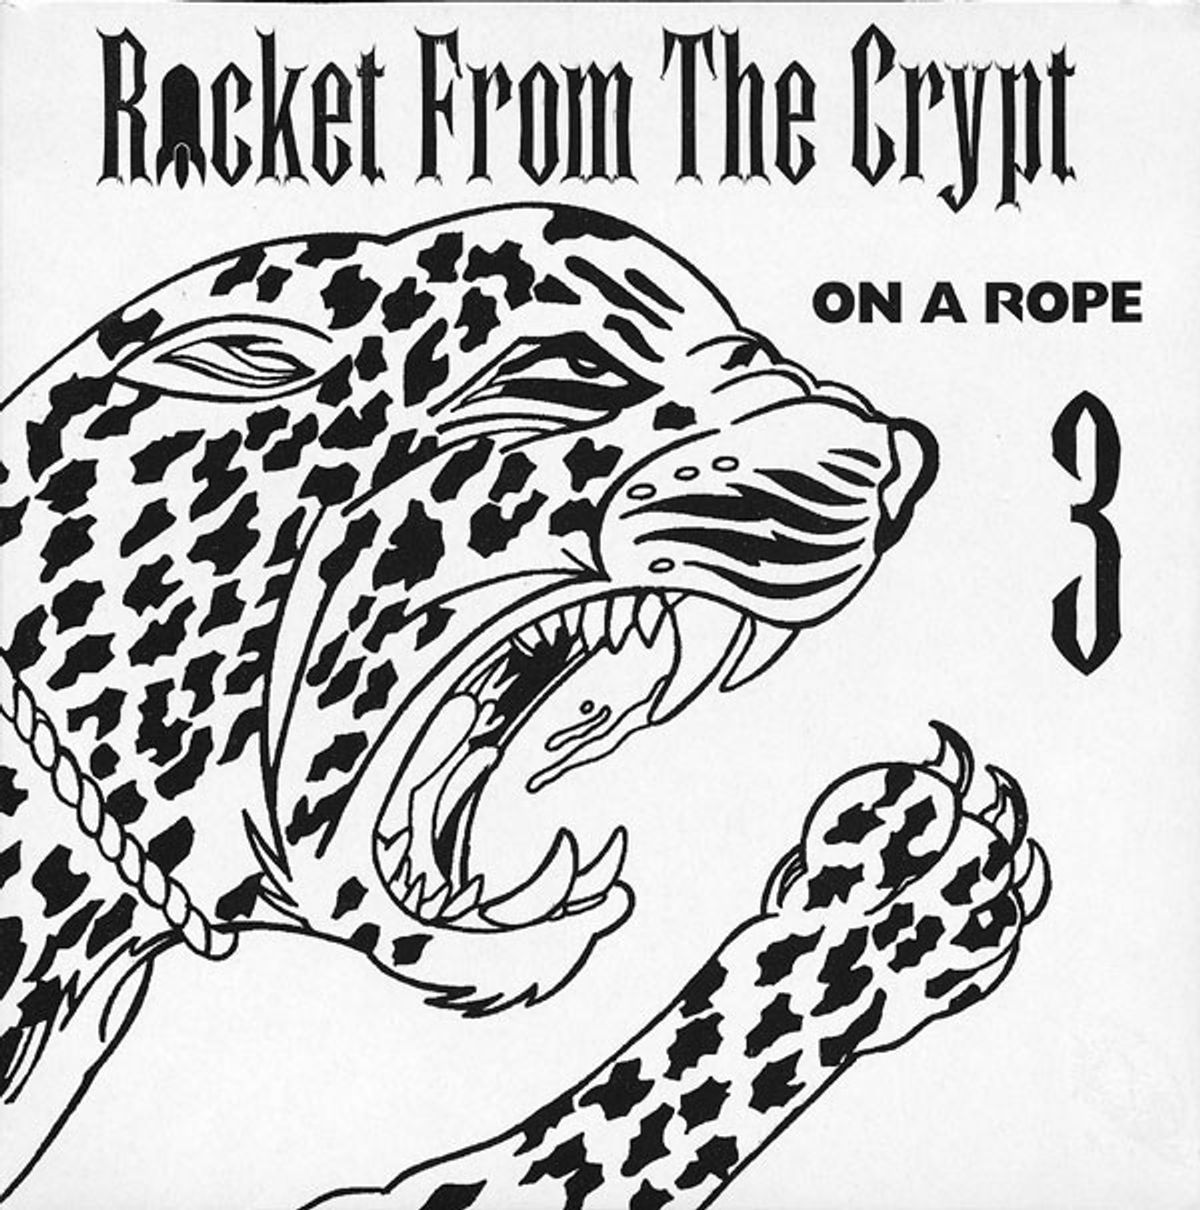 #Muilperen - Rocket From The Crypt - On A Rope (1995)